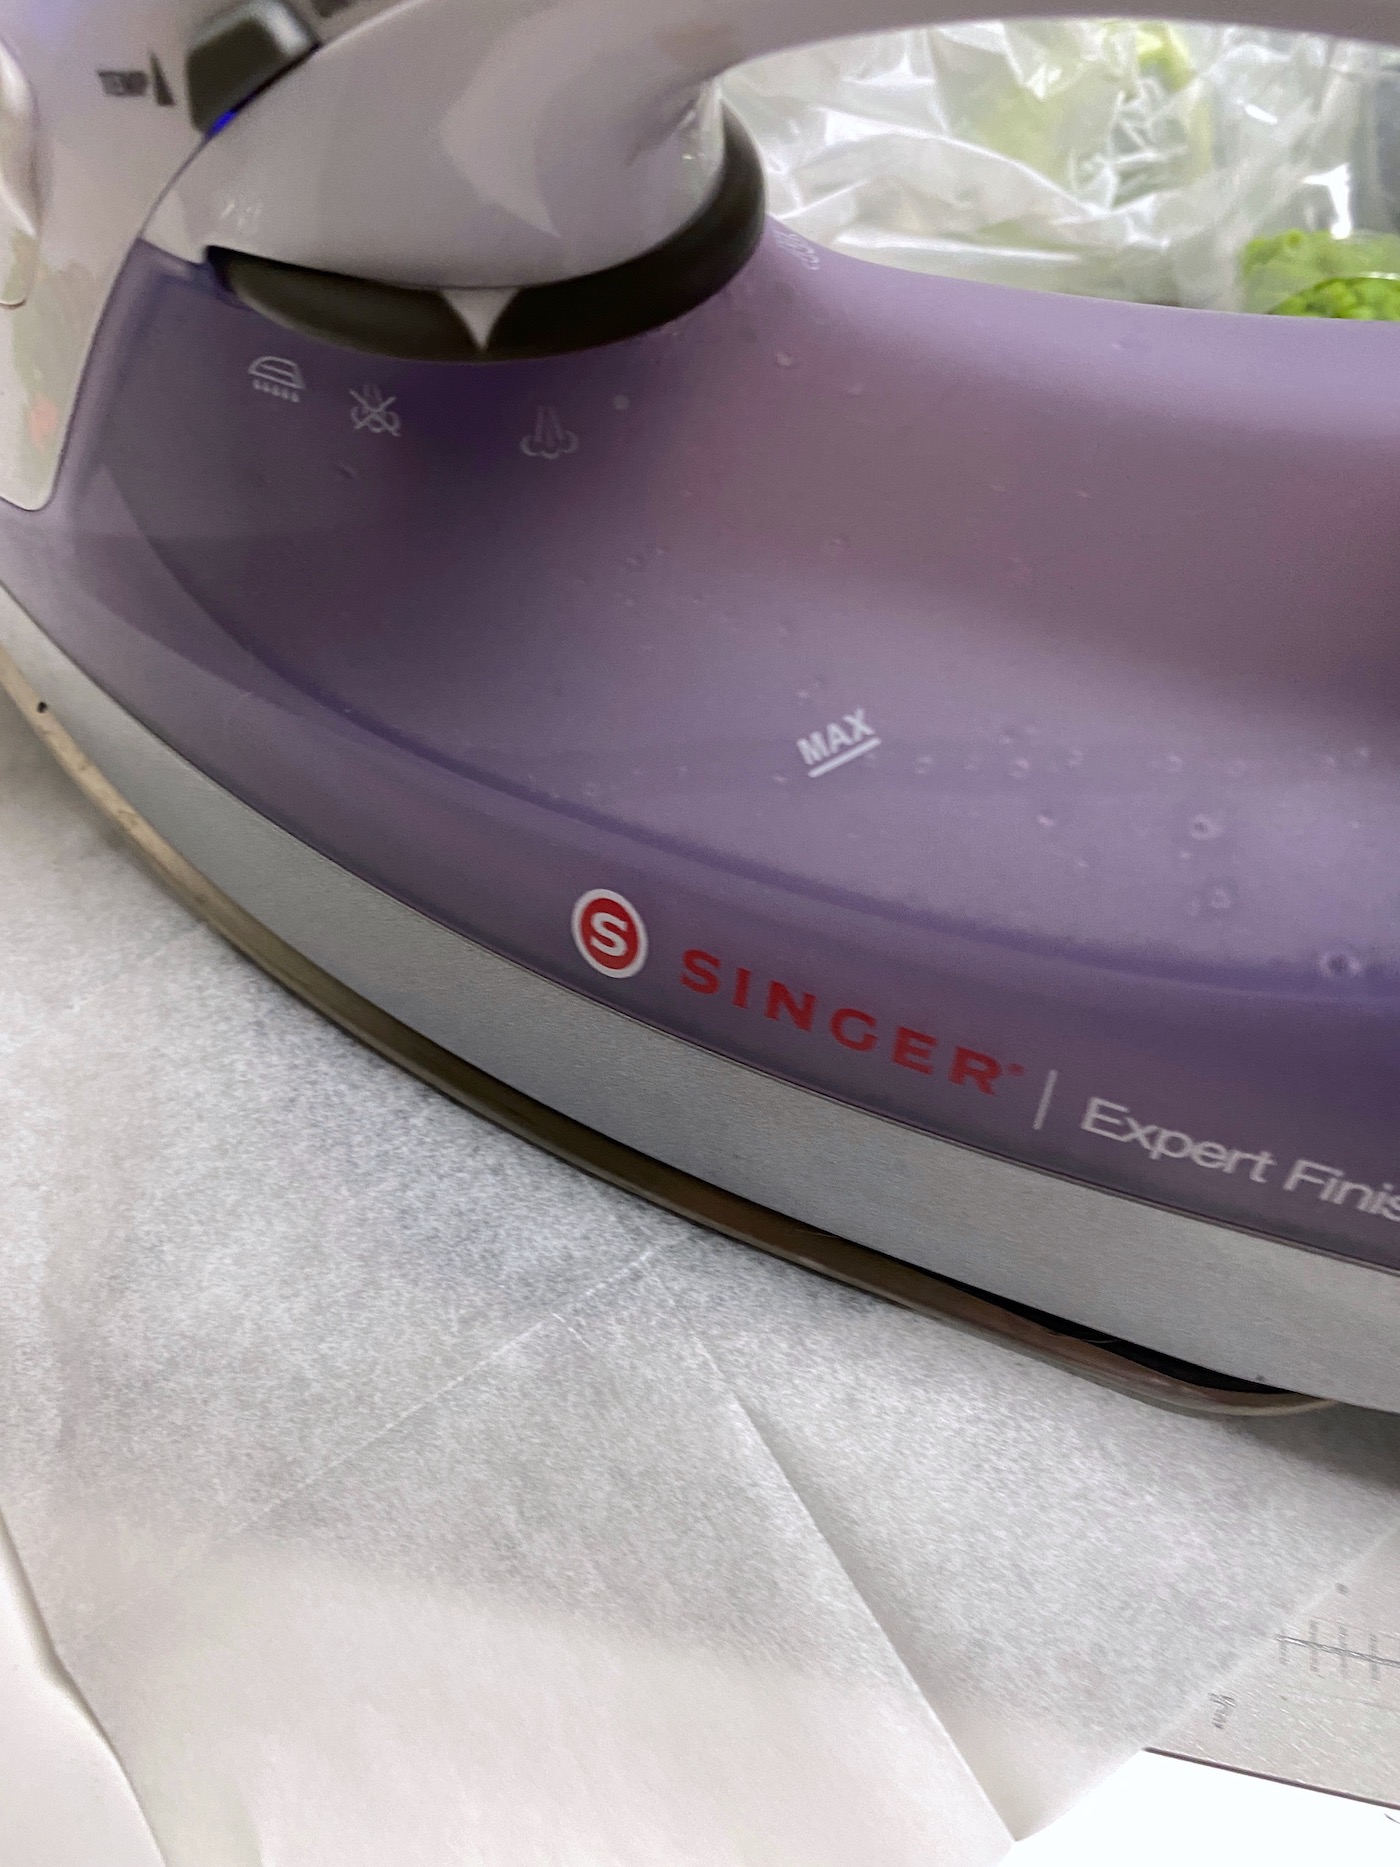 Ironing the parchment paper with an iron